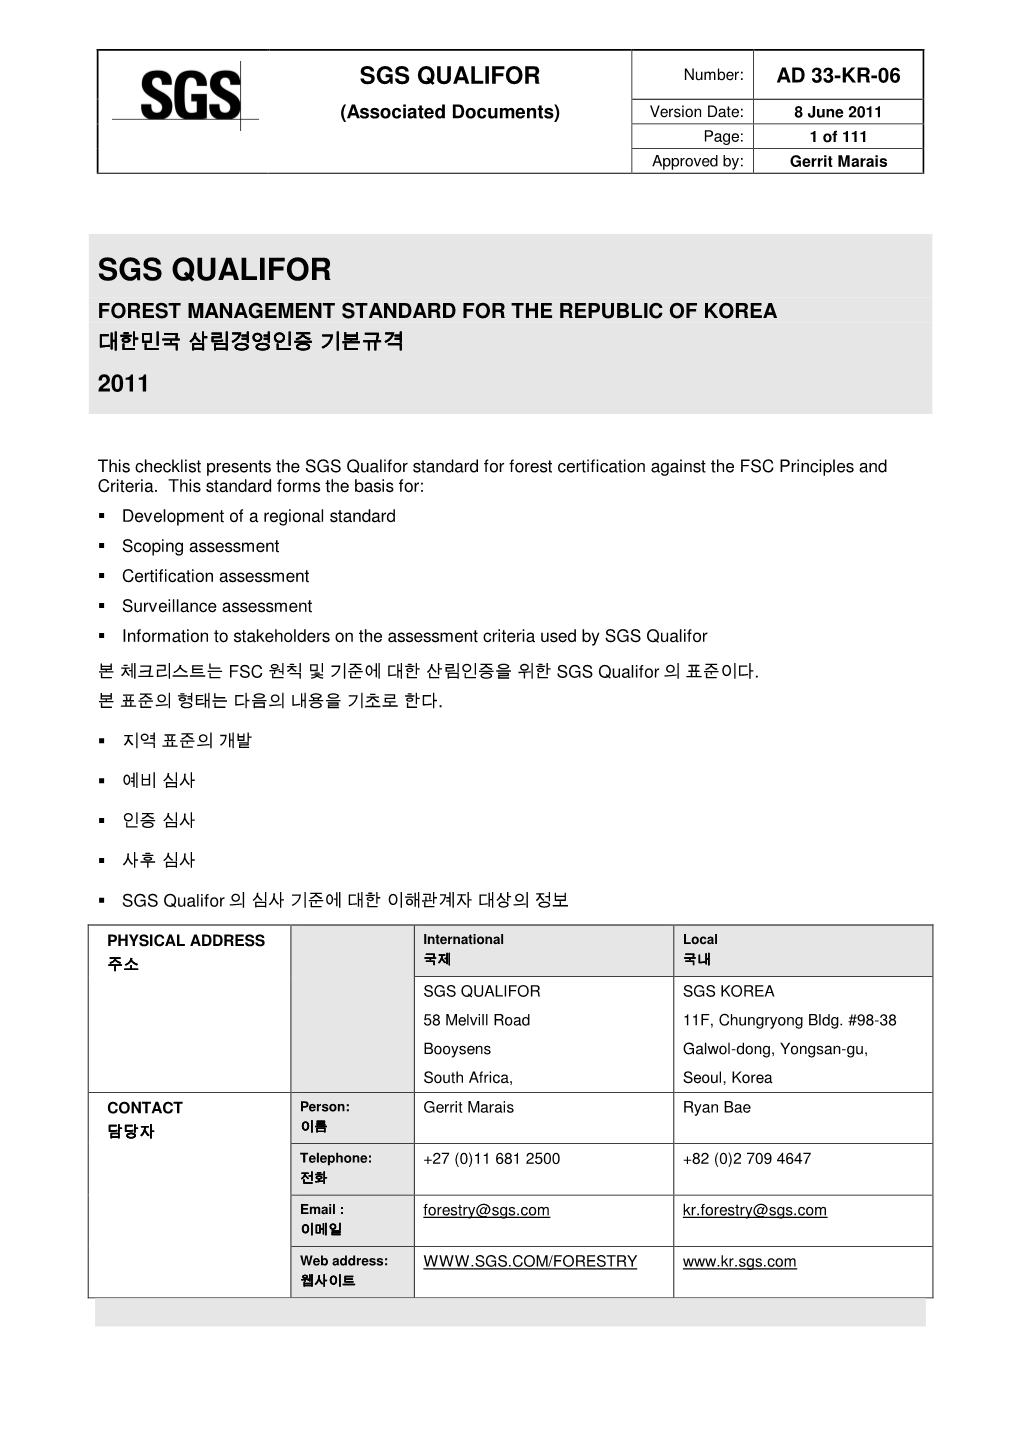 SGS QUALIFOR Number: AD 33-KR-06 (Associated Documents) Version Date: 8 June 2011 Page: 1 of 111 Approved By: Gerrit Marais